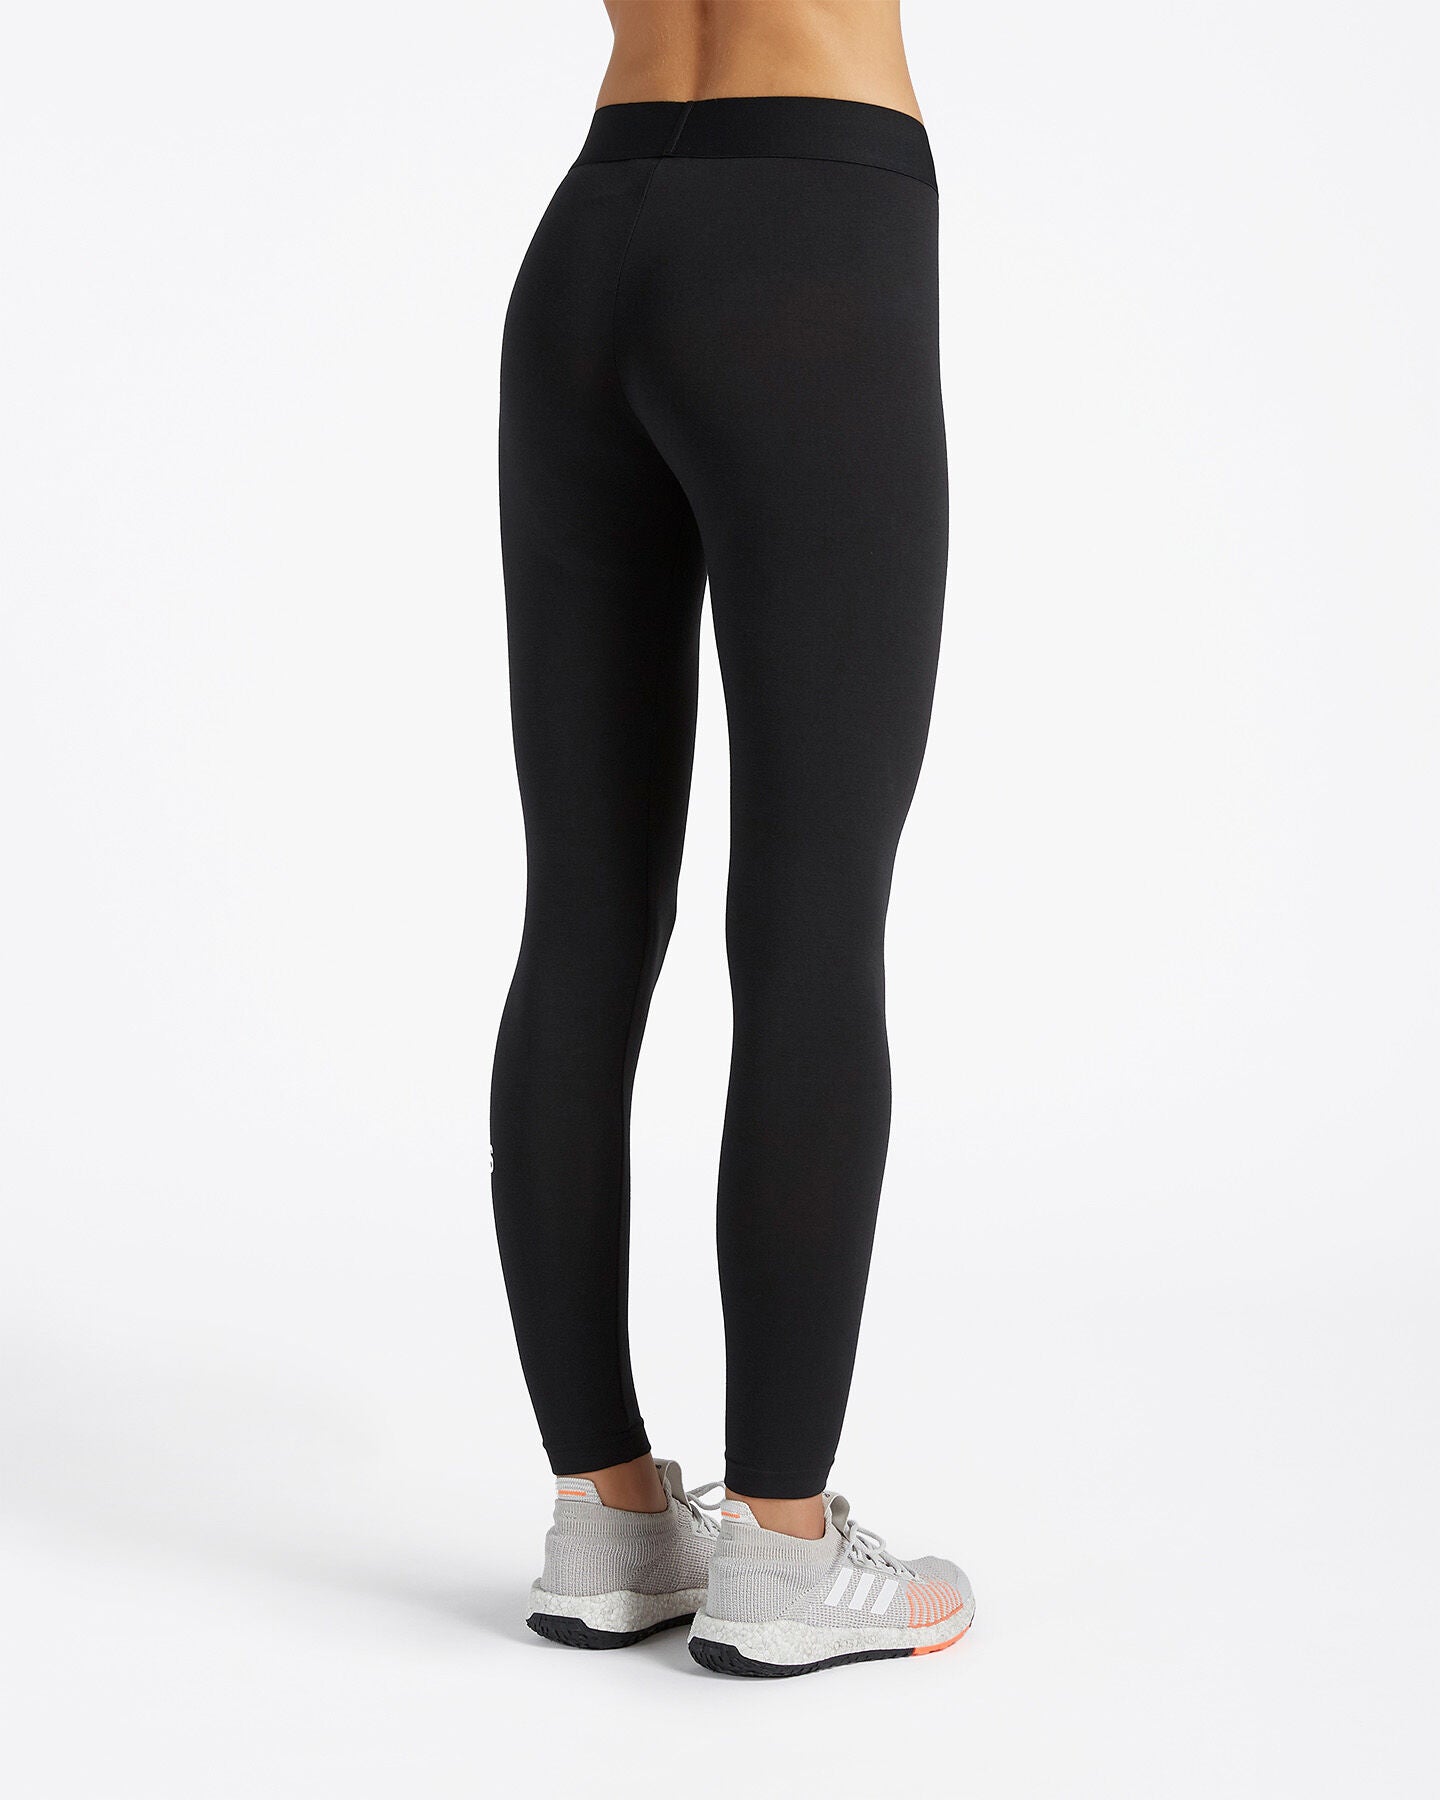 ADIDAS-F-LEGGING MUST HAVES BADGE OF SPORTS TIGHTS